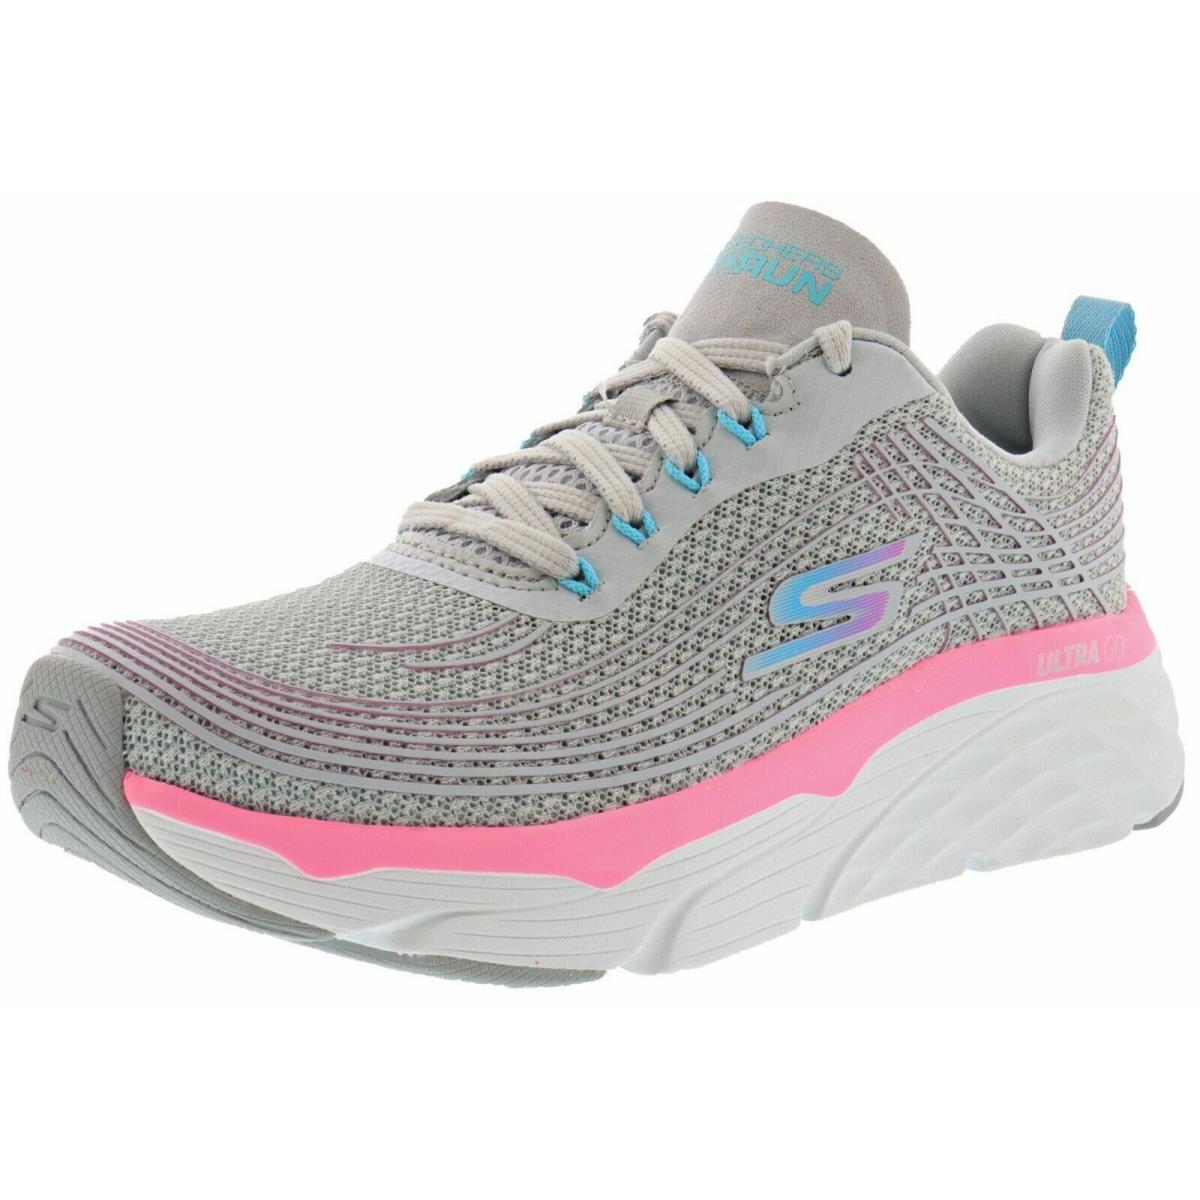 Gray Pink Skechers Women`s Max Cushoning Elite Gypk Lace Up Running Shoes 17693 - Gray / Pink